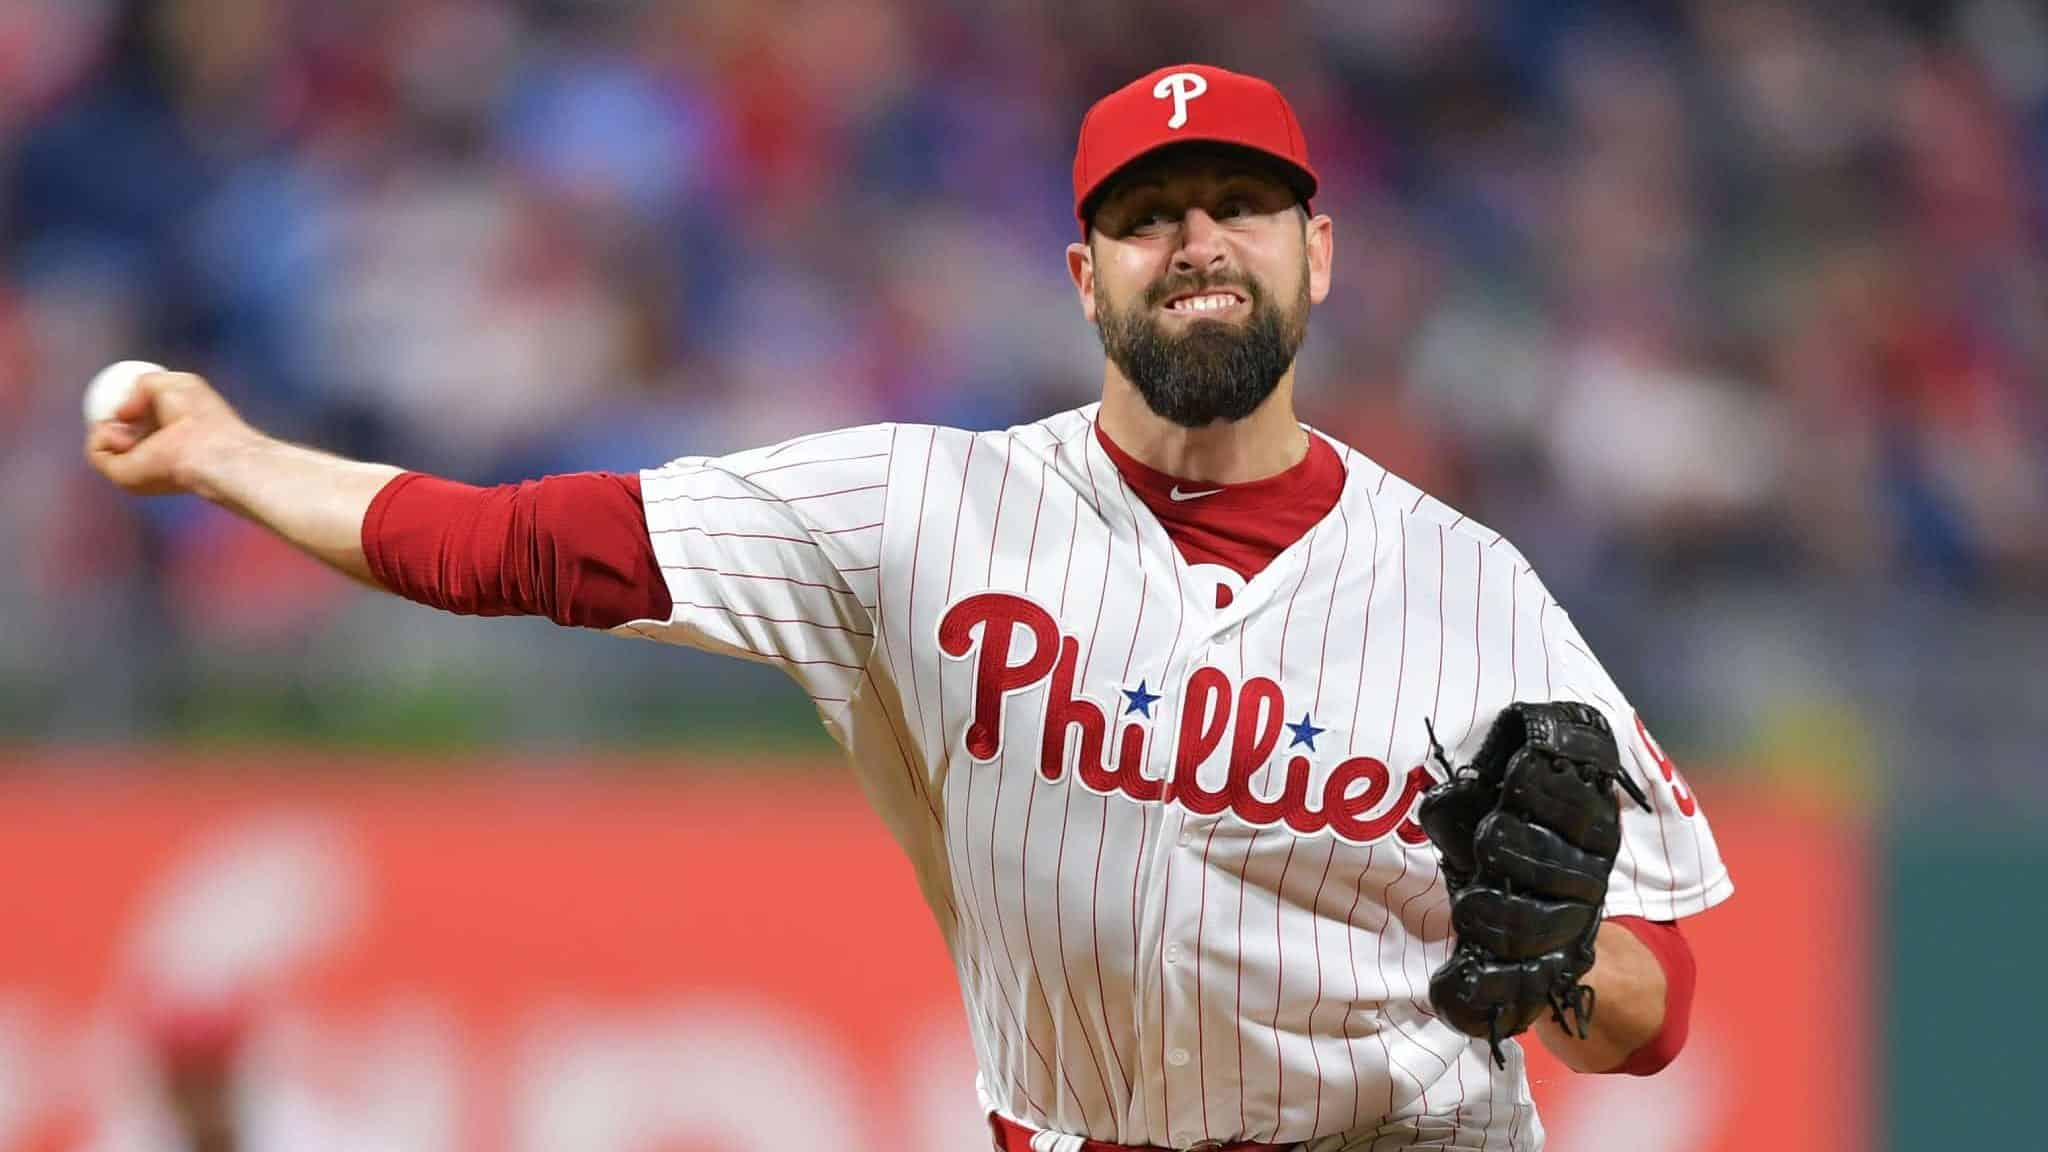 PHILADELPHIA, PA - MAY 03: Pat Neshek #93 of the Philadelphia Phillies delivers a pitch in the eighth inning against the Washington Nationals at Citizens Bank Park on May 3, 2019 in Philadelphia, Pennsylvania.